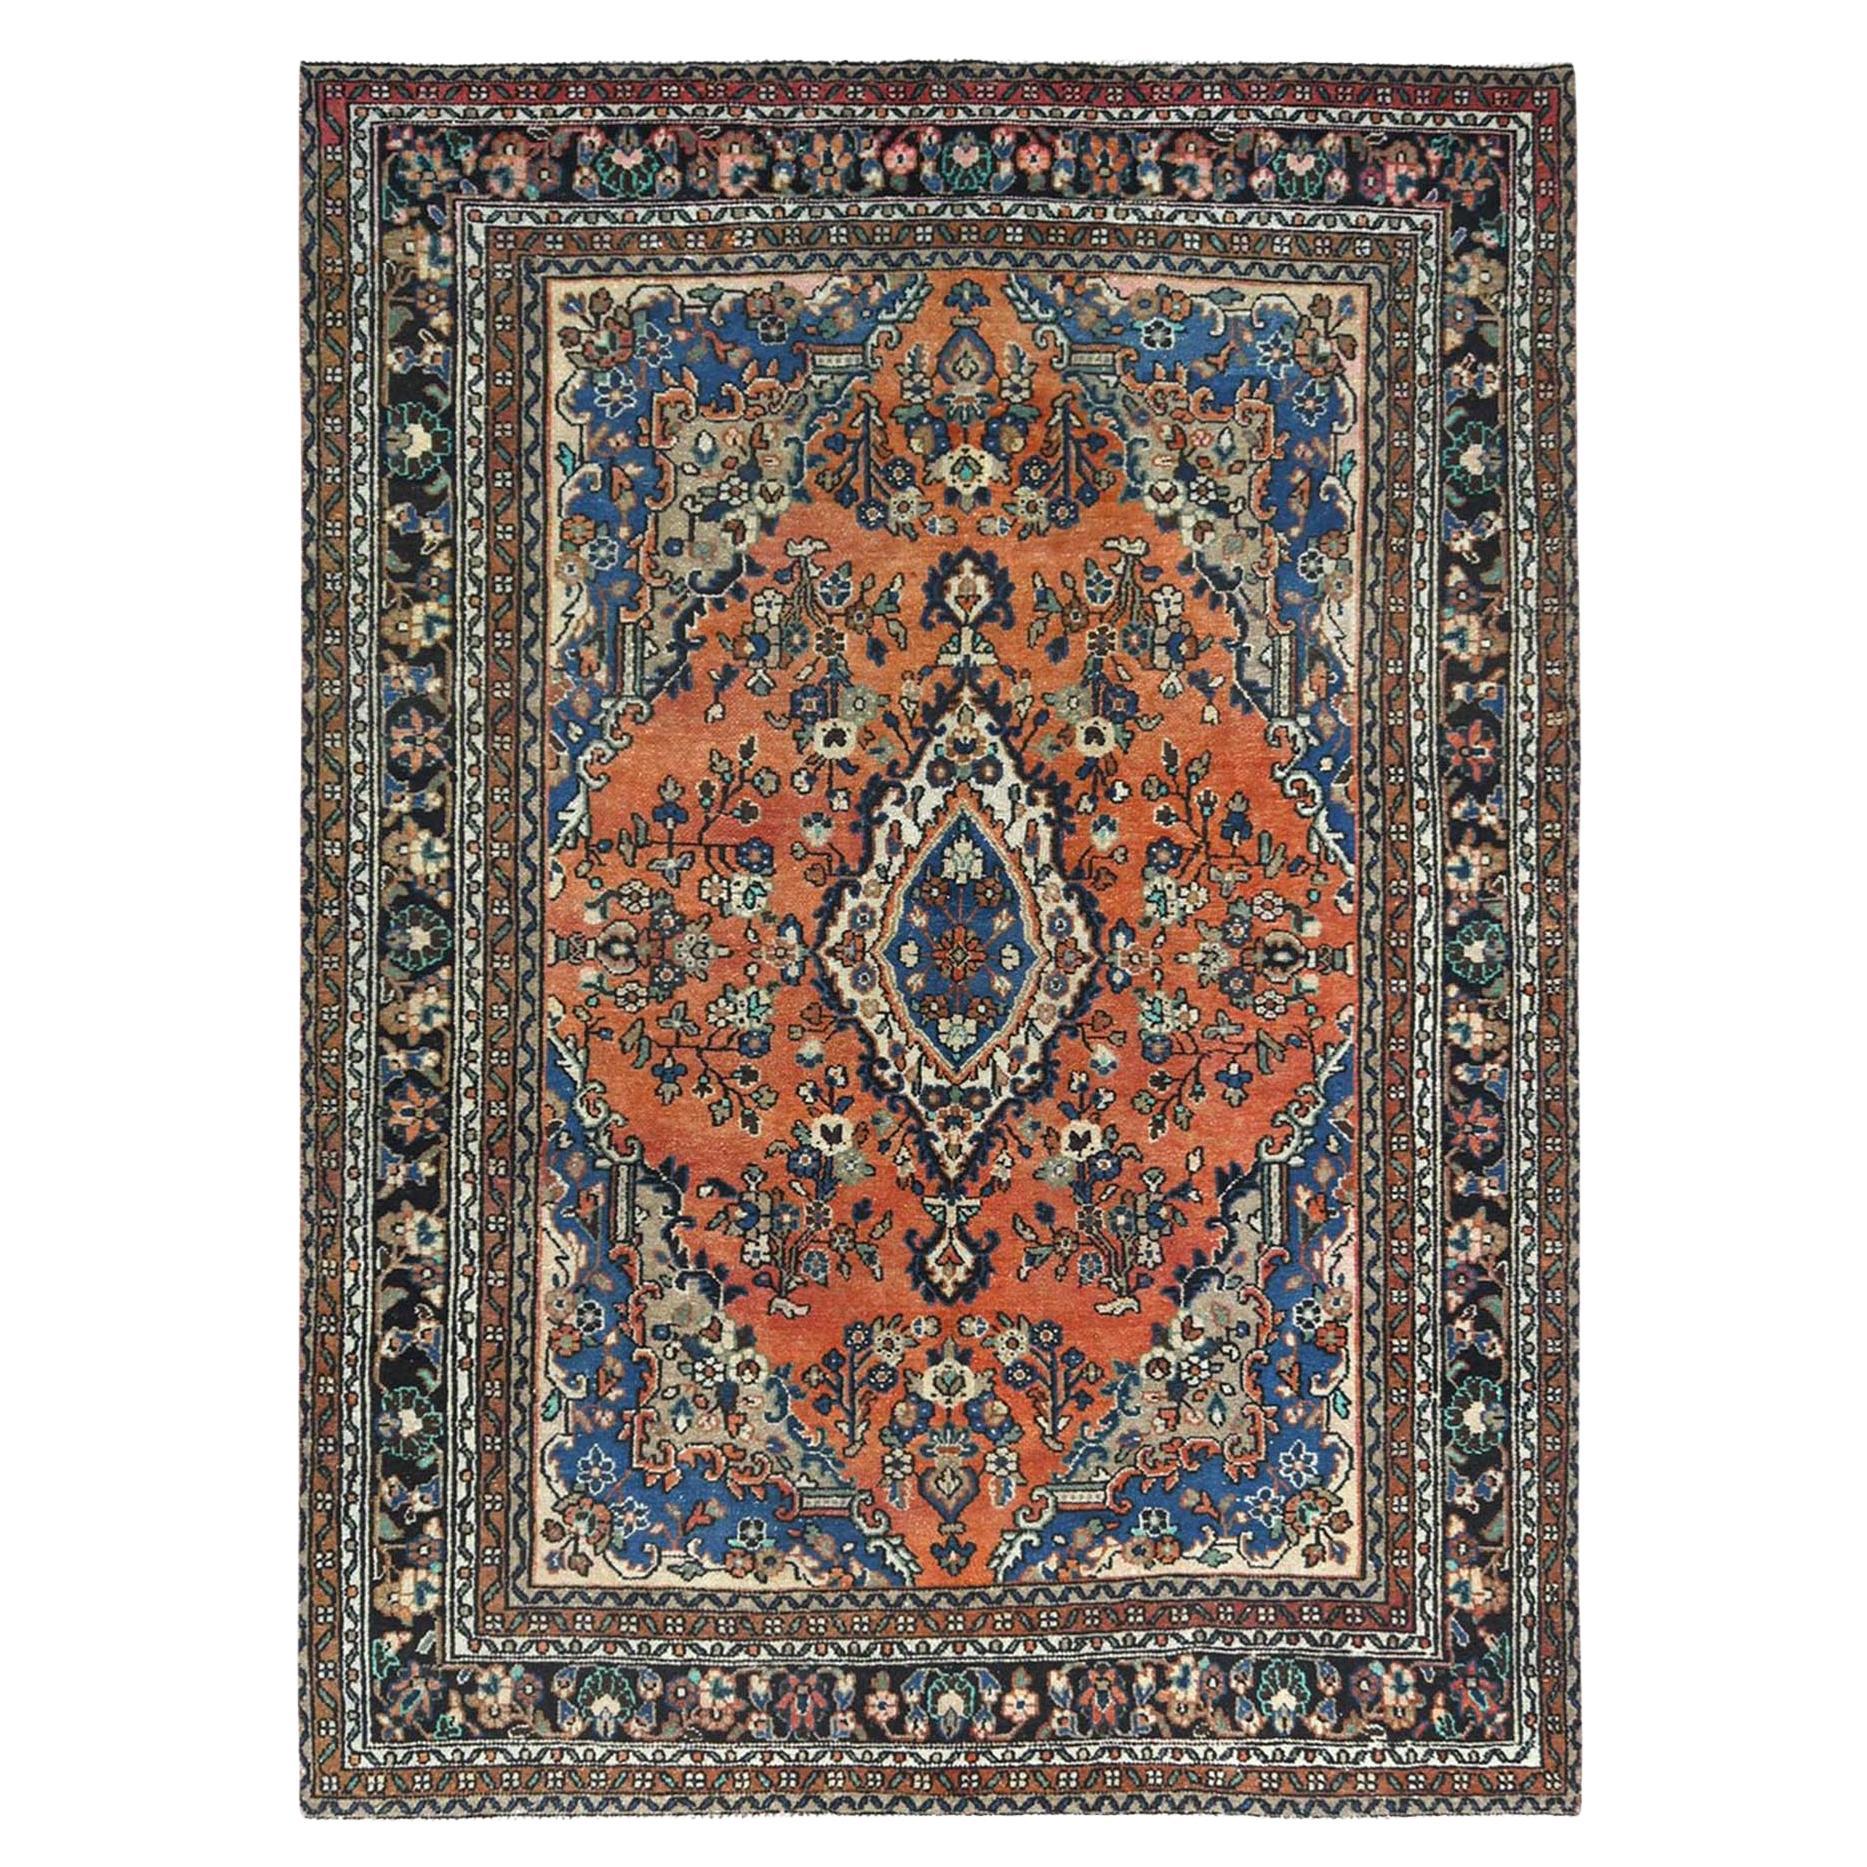 Rust Color Distressed Look Worn Wool Hand Knotted Vintage Persian Bibikabad Rug